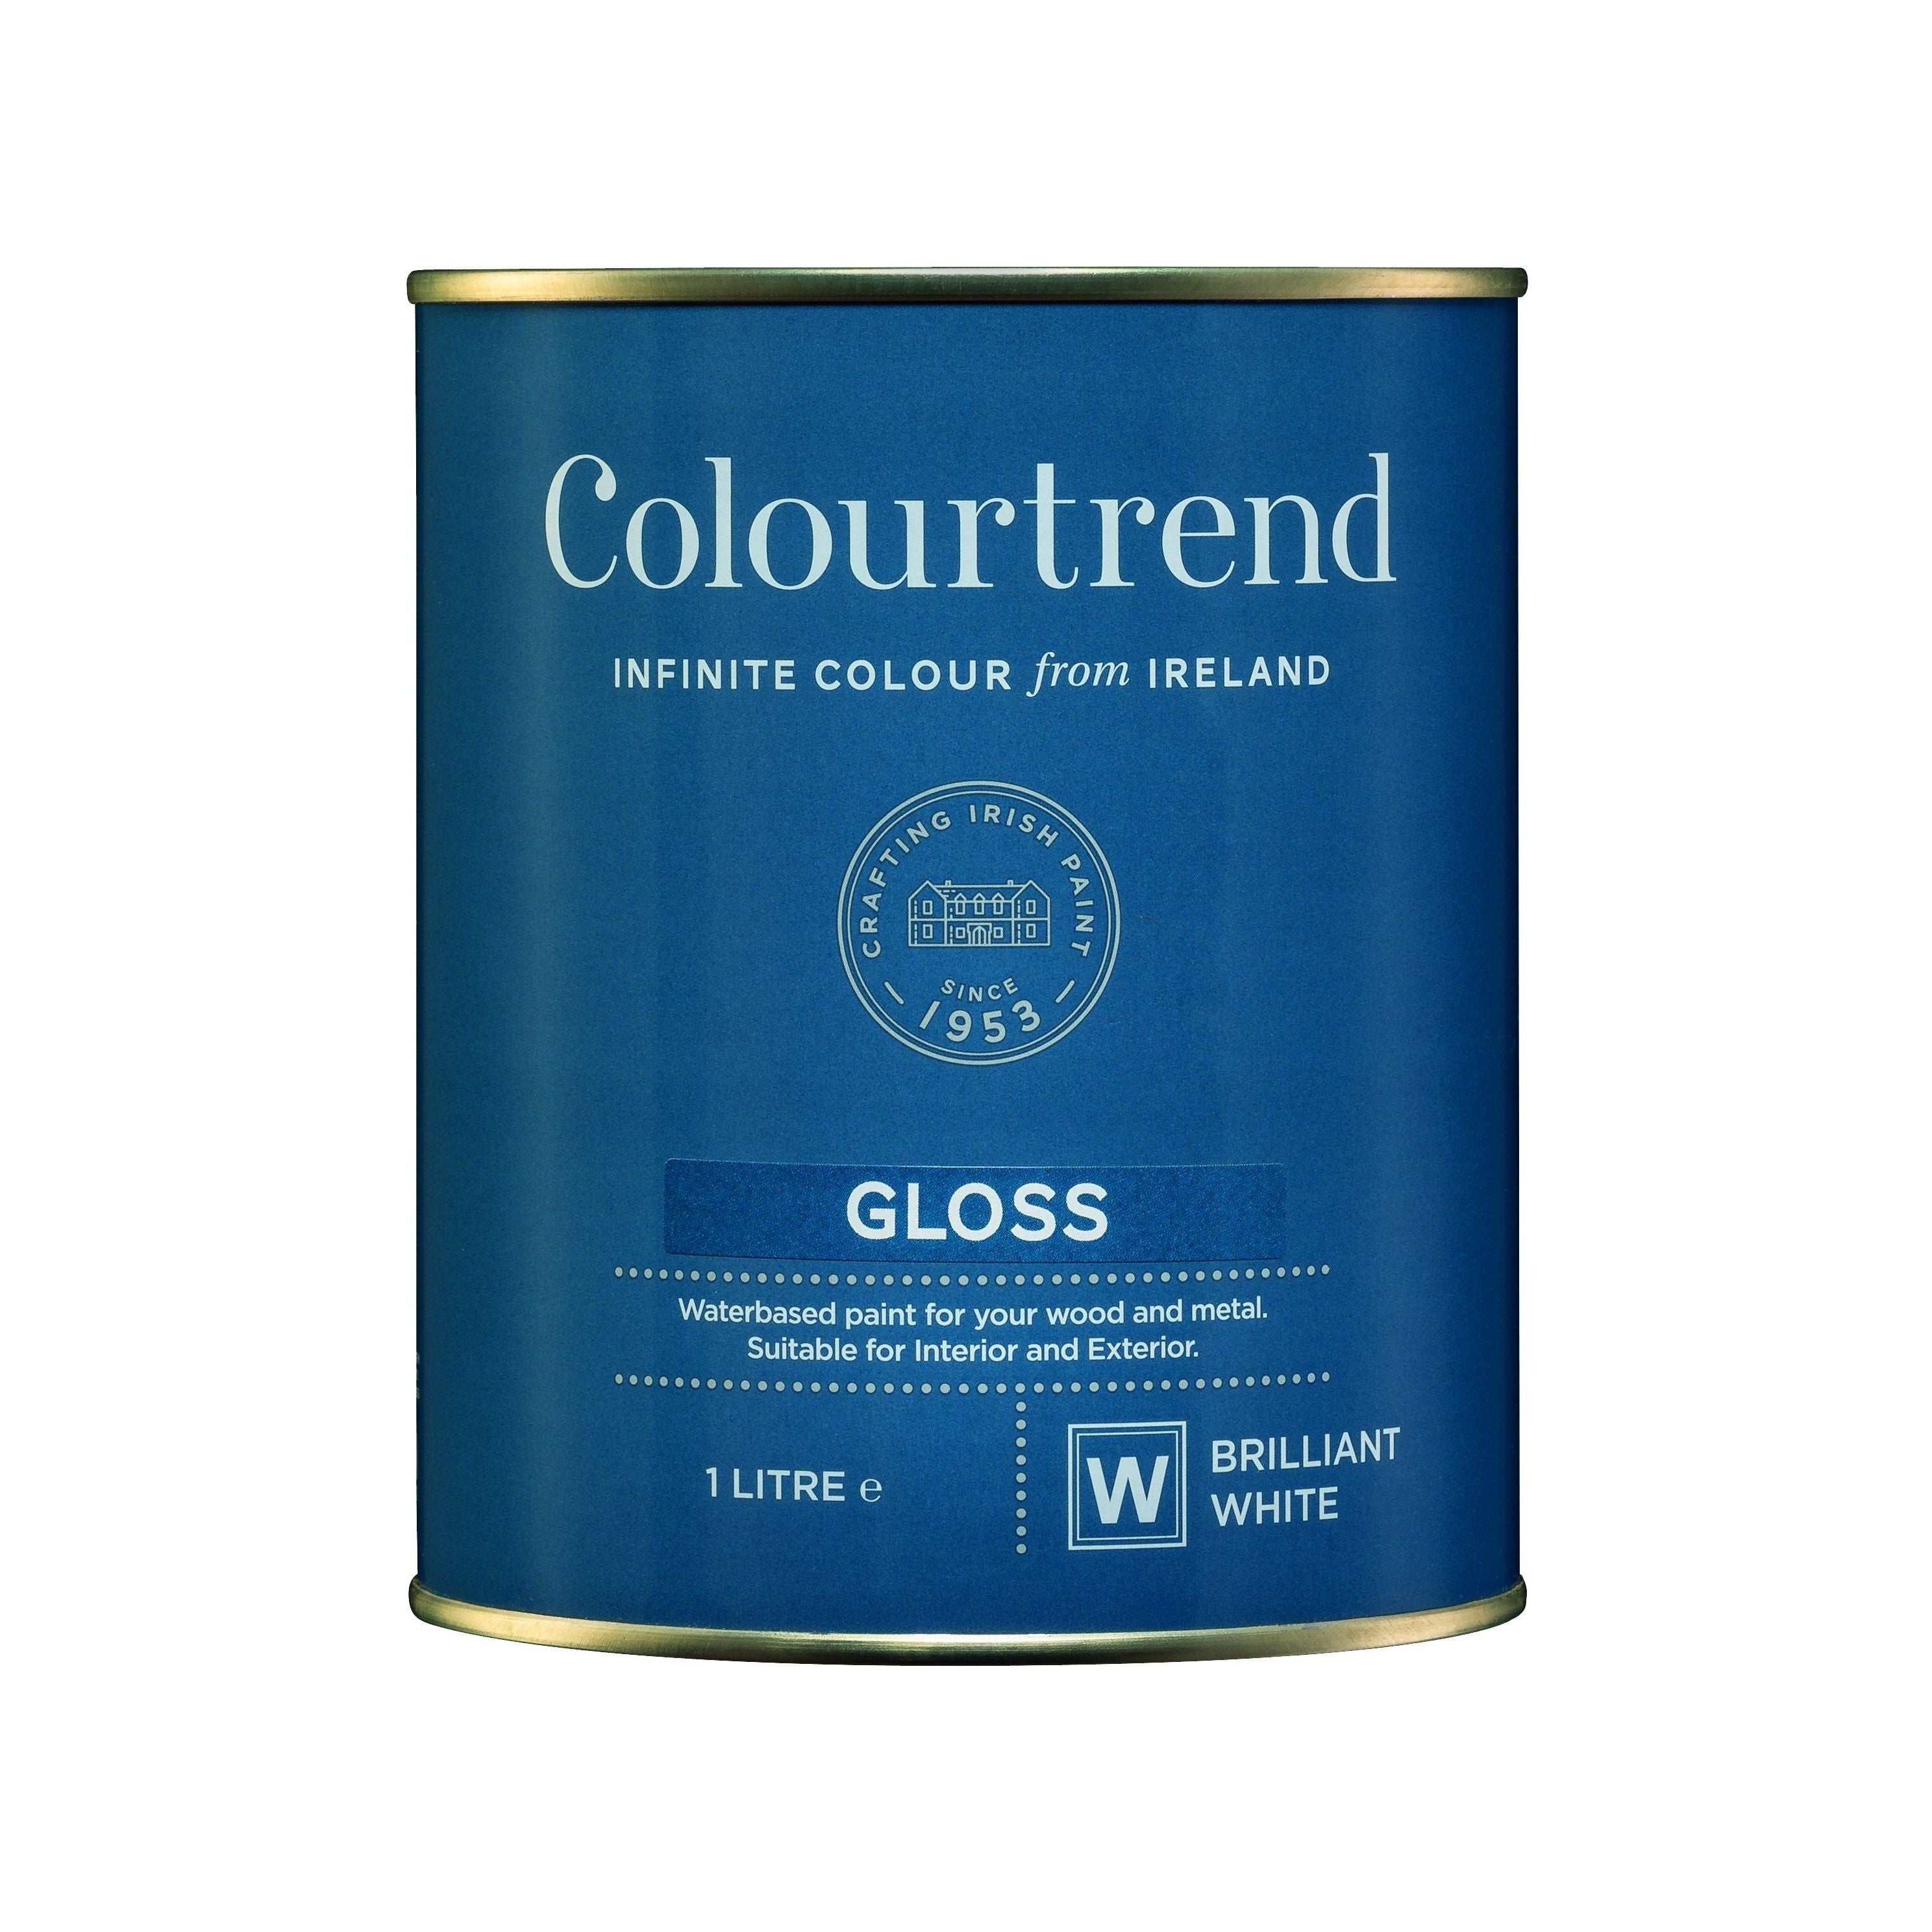 Colourtrend Waterbased Gloss WB